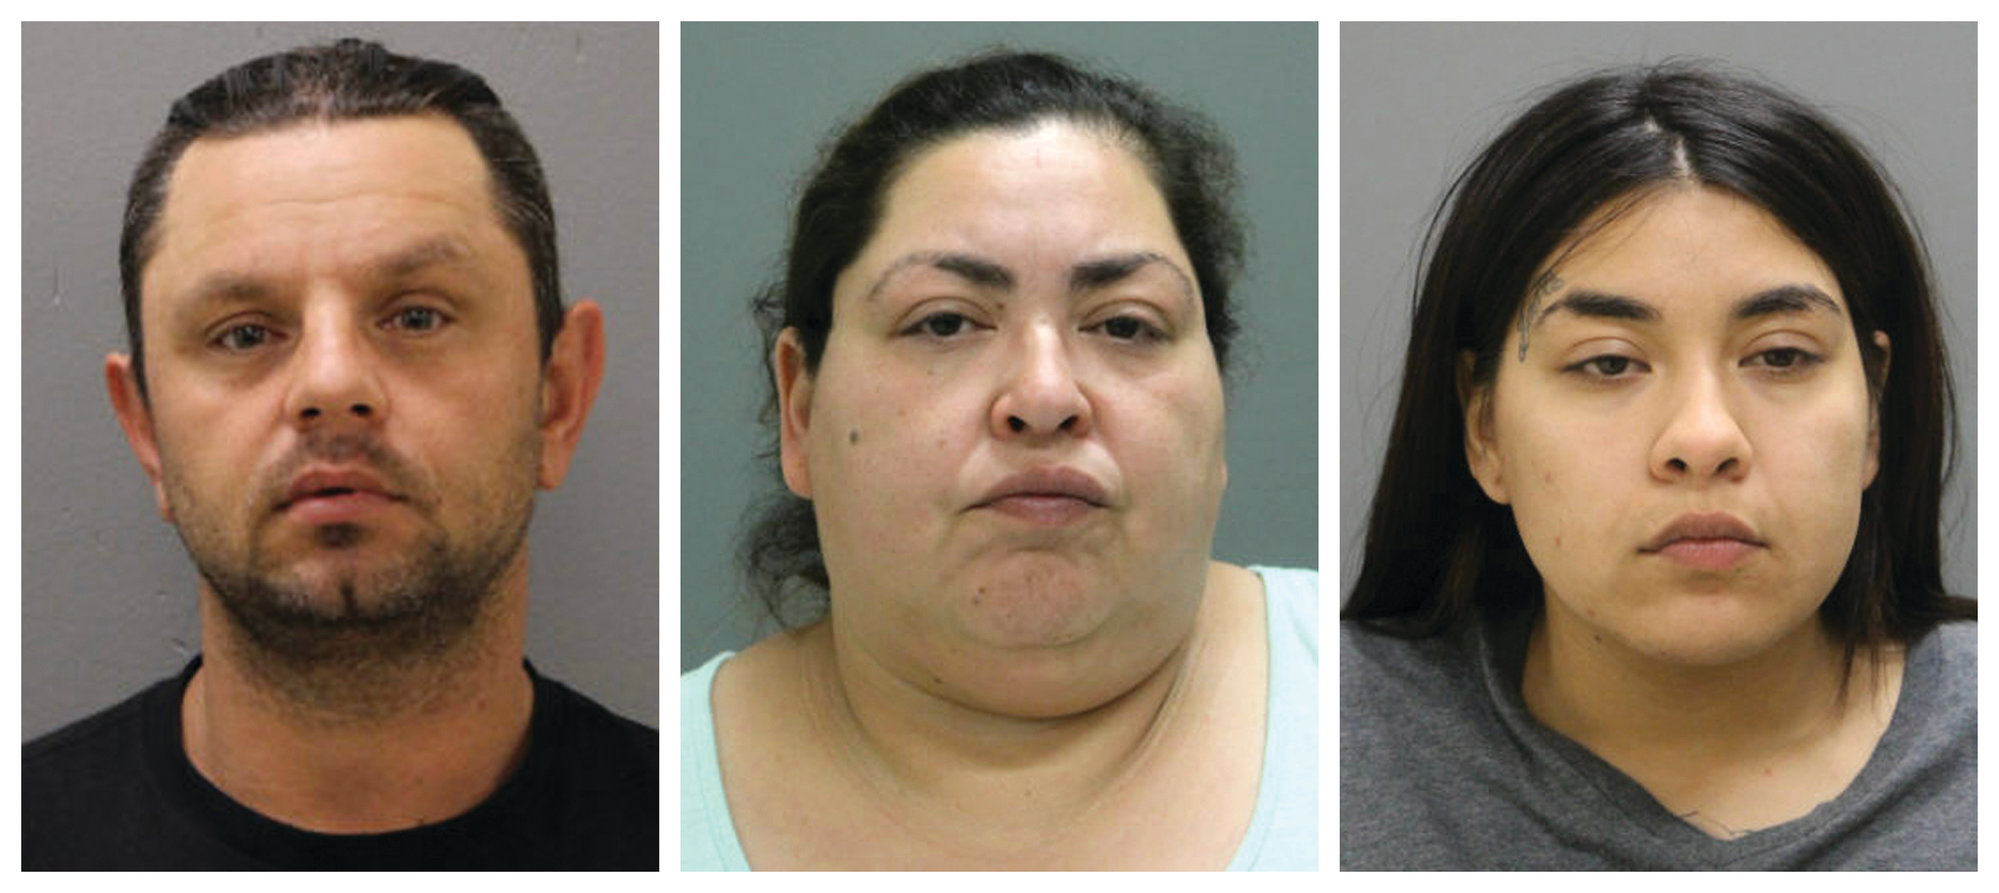 This combination of booking photos provided by the Chicago Police Department on Thursday, May 16, 2019 shows from left, Pioter Bobak, 40; Clarisa Figueroa, 46; and Desiree Figueroa, 24. Charges against them come three weeks after 19-year-old Marlen Ochoa-Lopez disappeared and a day after her body was discovered in a garbage can in the backyard of Clarissa Figueroa's home in Chicago's Southwest Side. Police said the teenager was strangled and her baby cut from her body.